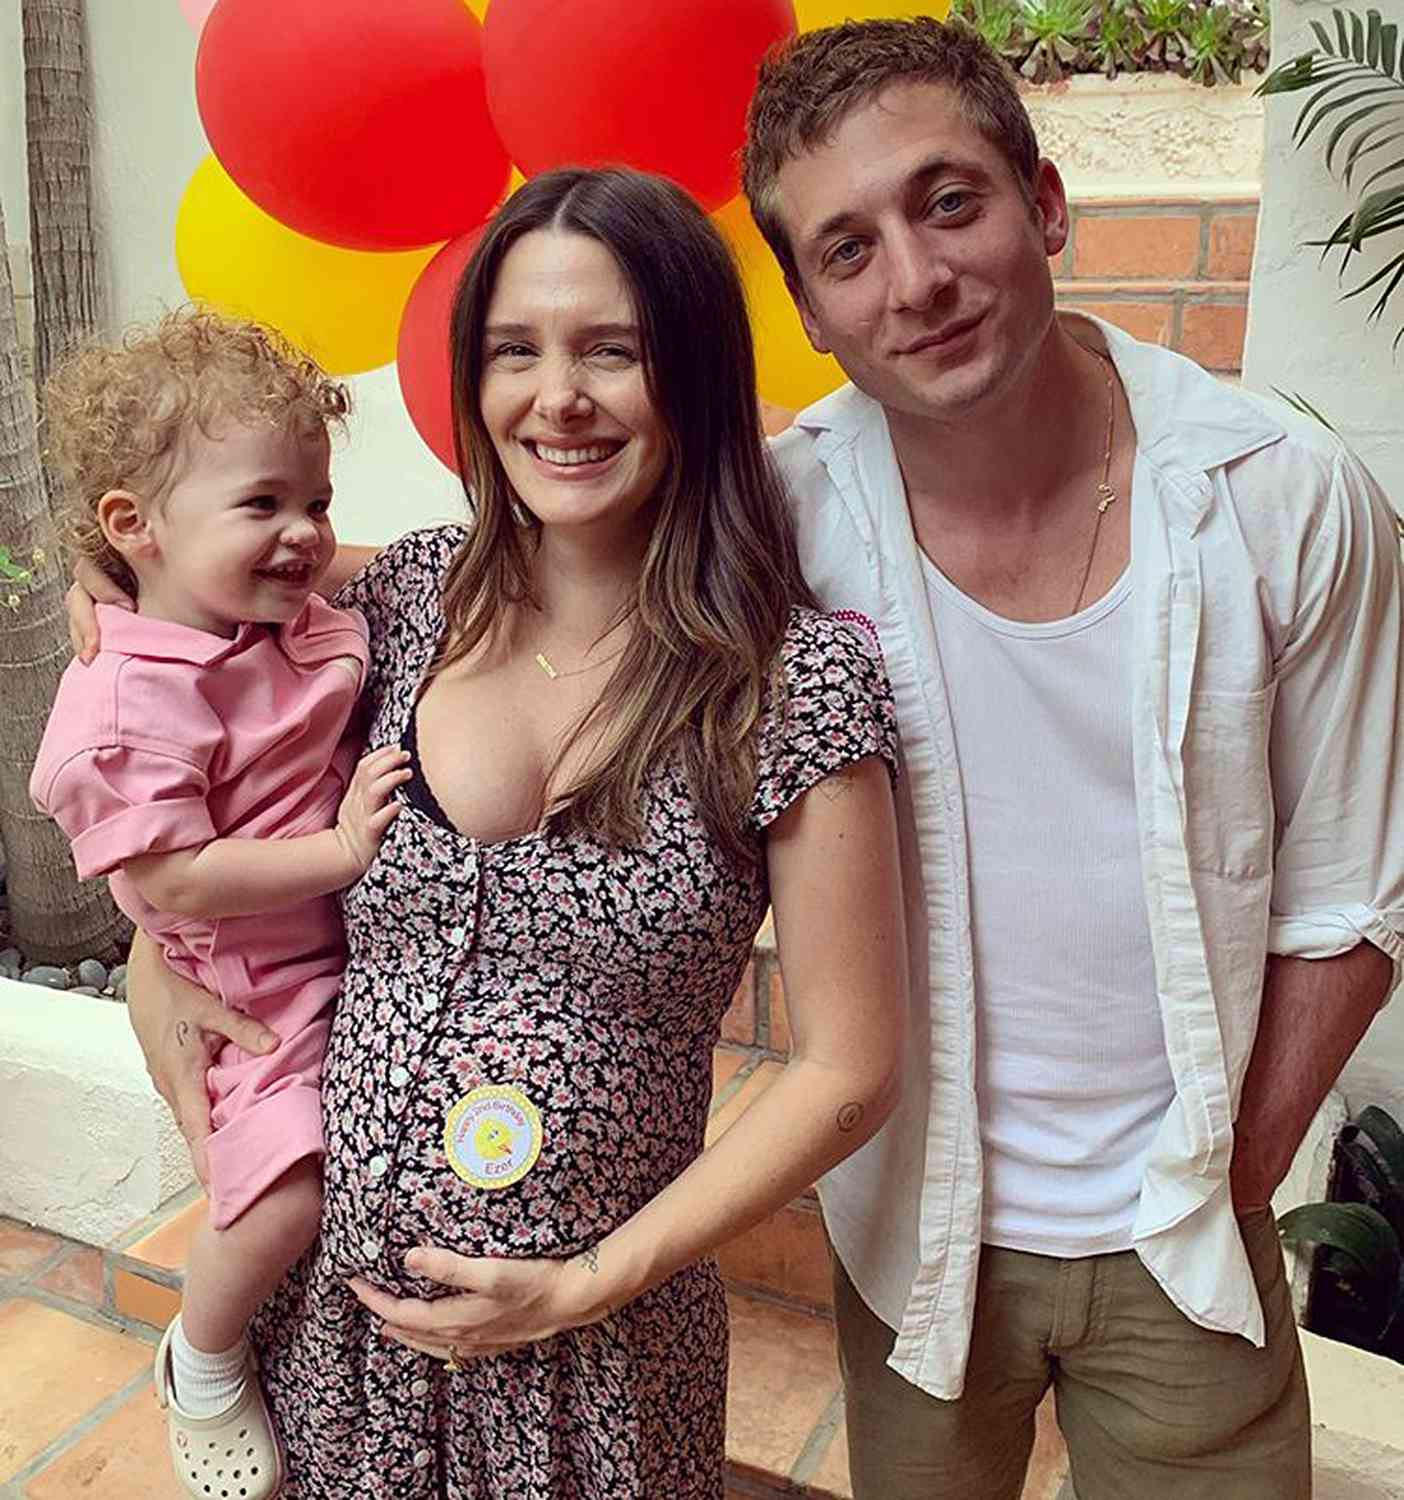 <p>Addison Timlin and Shameless star Jeremy Allen White welcomed their second child together, a baby girl, on Dec. 12, Timlin announced on Instagram. The new addition joins 2-year-old big sister Ezer Billie.</p>
                            <p>"Dolores Wild White- born 12/12/2020, just in time to save the year. She is the answer to 1000 prayers and we are in love with her," the mom wrote on Instagram alongside a photo of herself breastfeeding her newborn in a hospital room. "Thank you to my sister and my mama for taking care of my family while I waited in hospital for this little one to join us earth side." She went on to thank the hospital staff as well as her daughter and husband.</p>
                            <p>"Thank you Ezer for your patience and wisdom - you're the best big sister ever and finally to my husband, you are everything. We did it baby," she added.</p>
                            